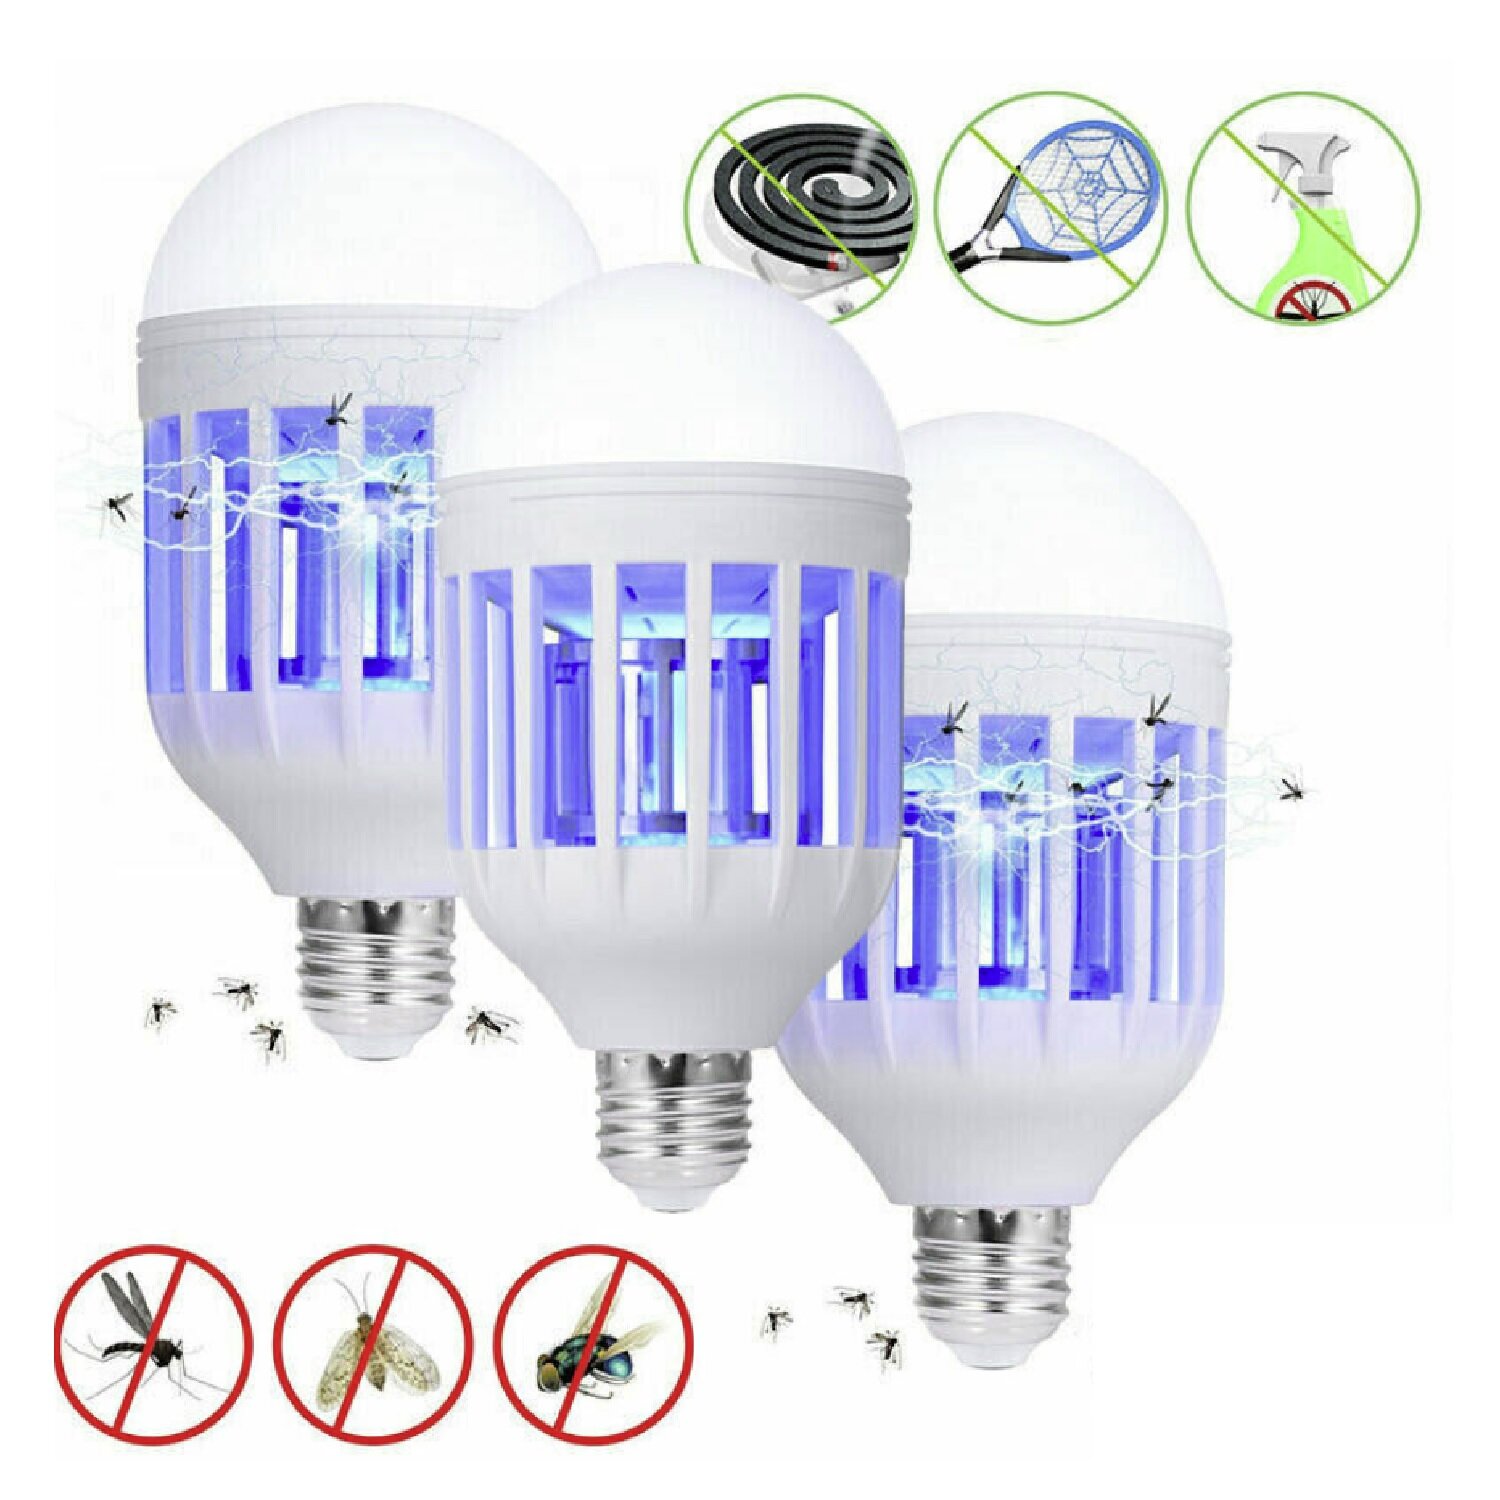 Bug Zapper Light Bulb 2 in 1 Mosquitoes Killer Lamp Led Electronic Insect & Fly Killer 